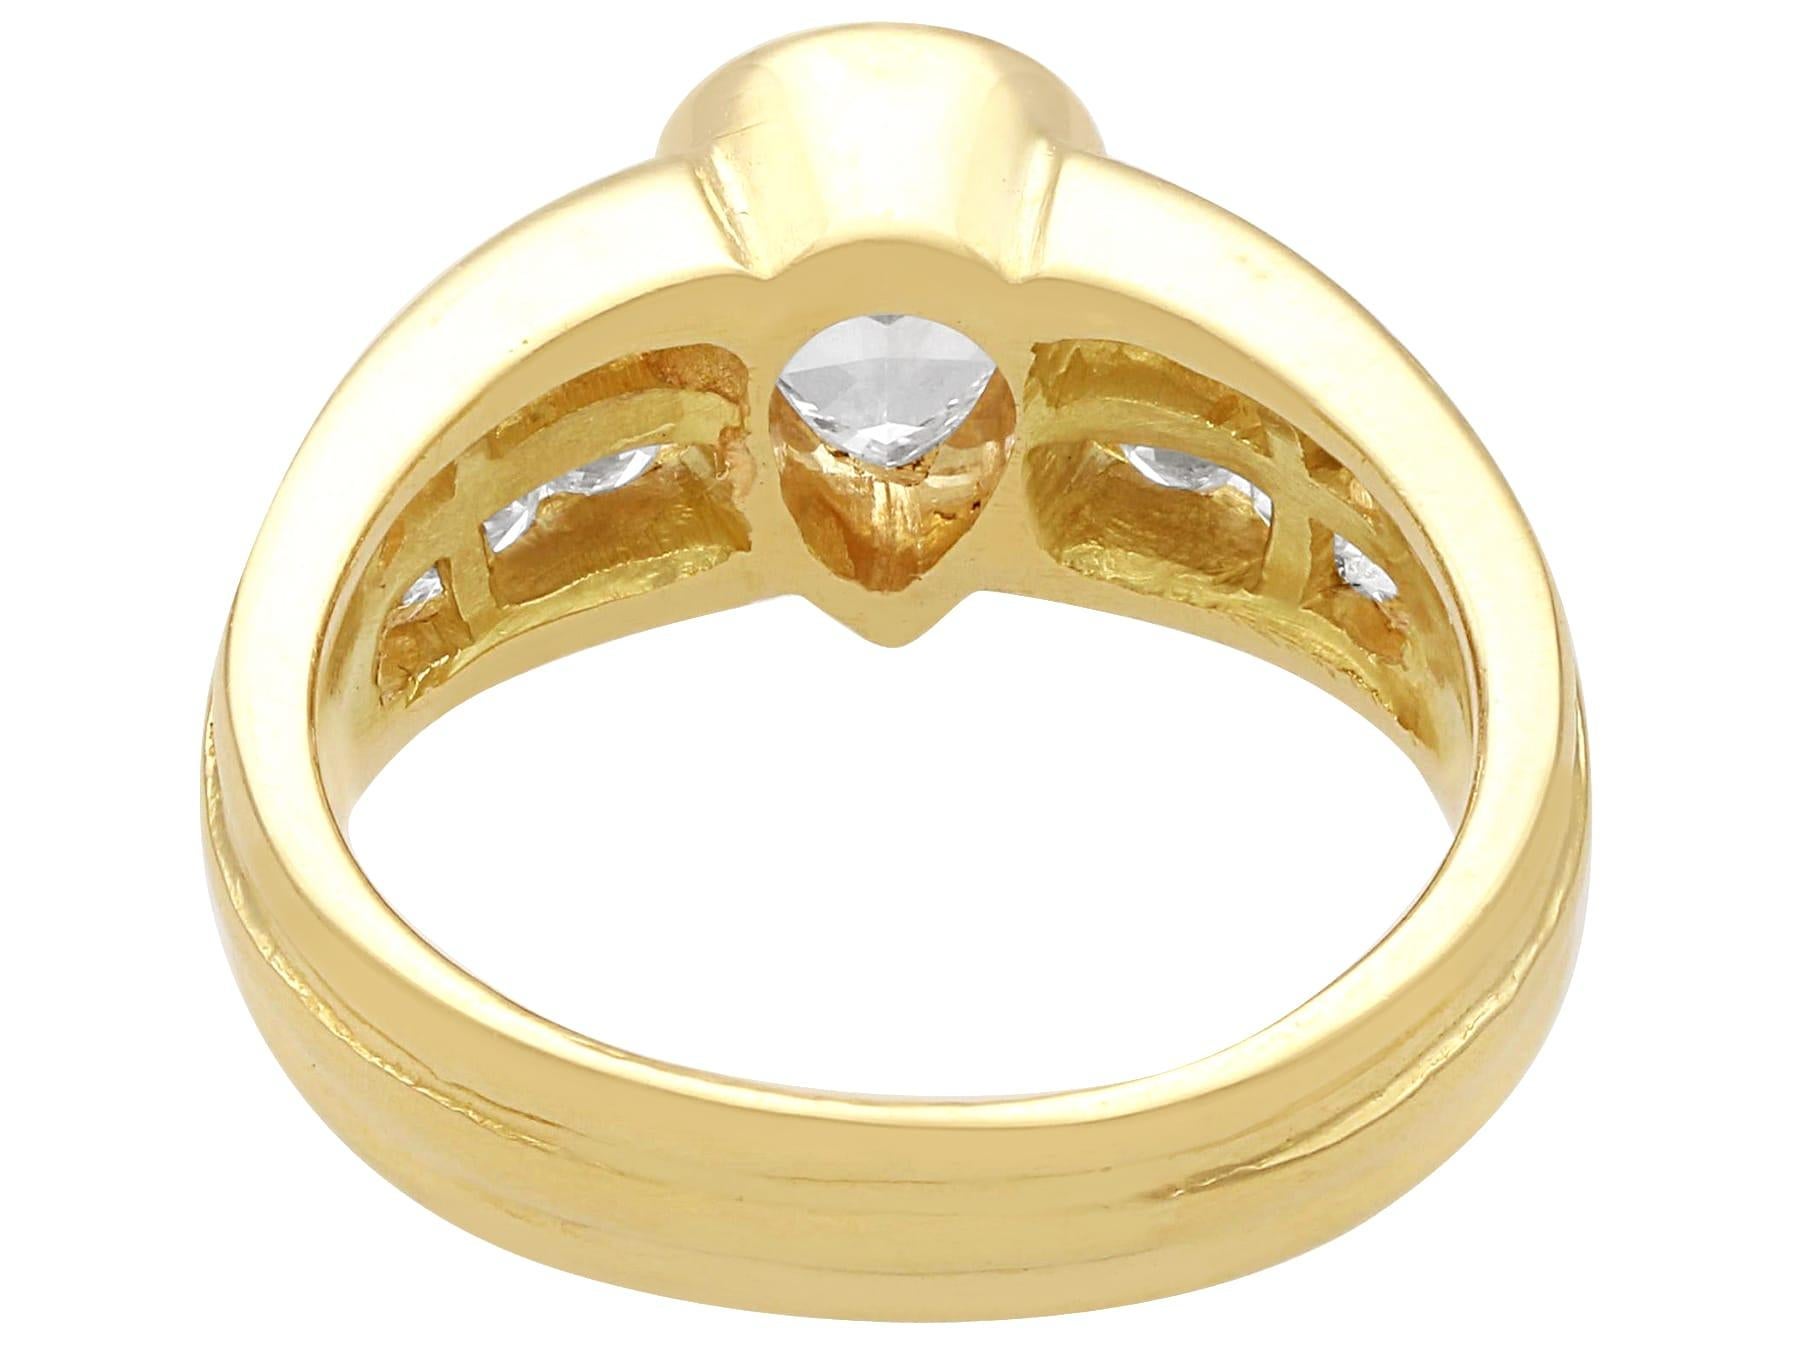 Vintage 1.43ct Diamond and Yellow Gold Ring, circa 1990 In Excellent Condition For Sale In Jesmond, Newcastle Upon Tyne